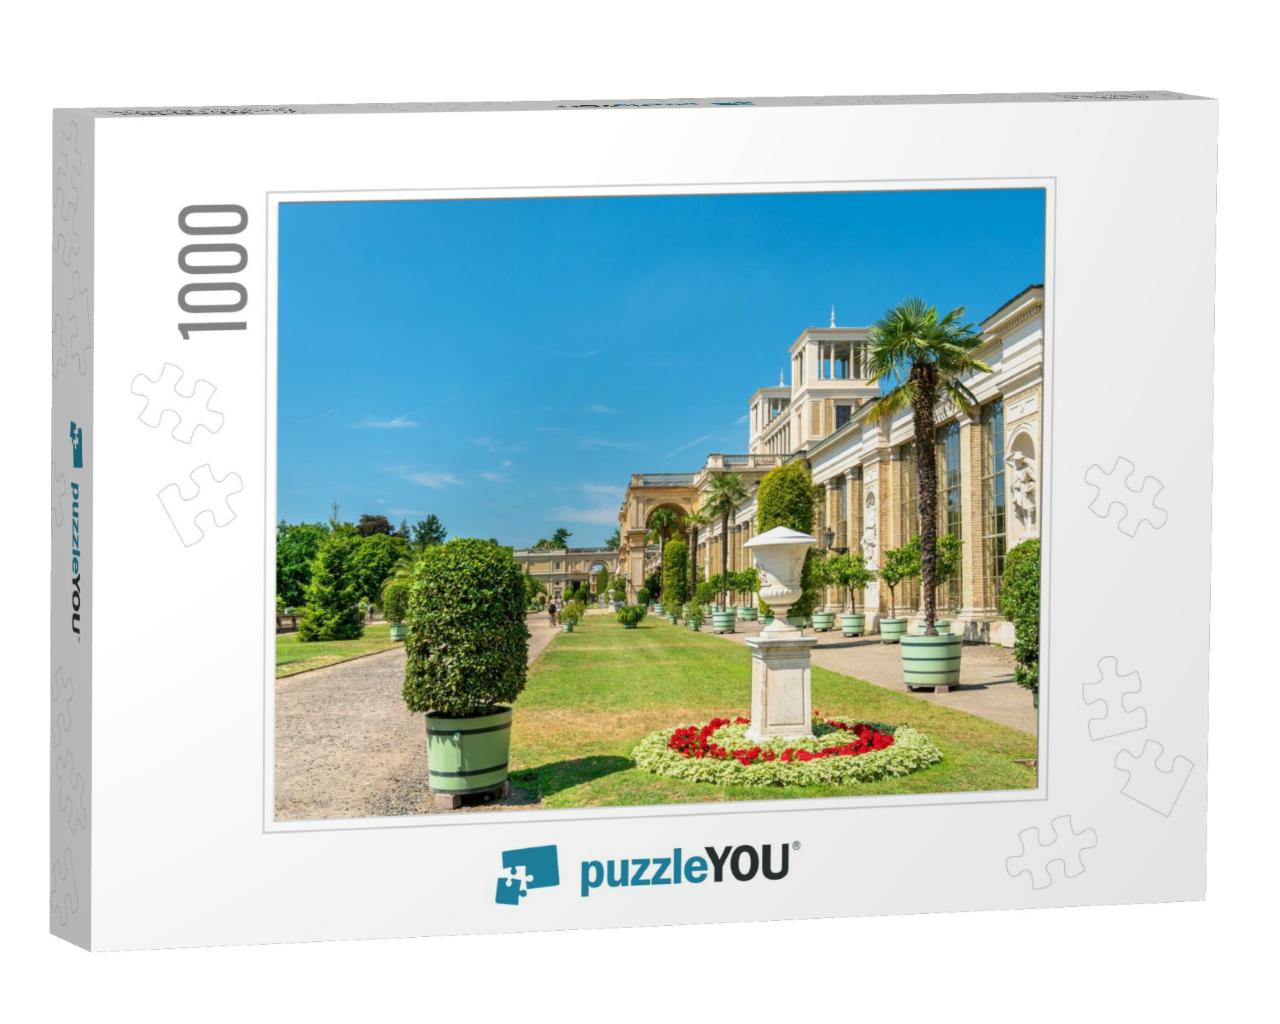 The Orangery Palace in the Sanssouci Park - Potsdam, Germ... Jigsaw Puzzle with 1000 pieces